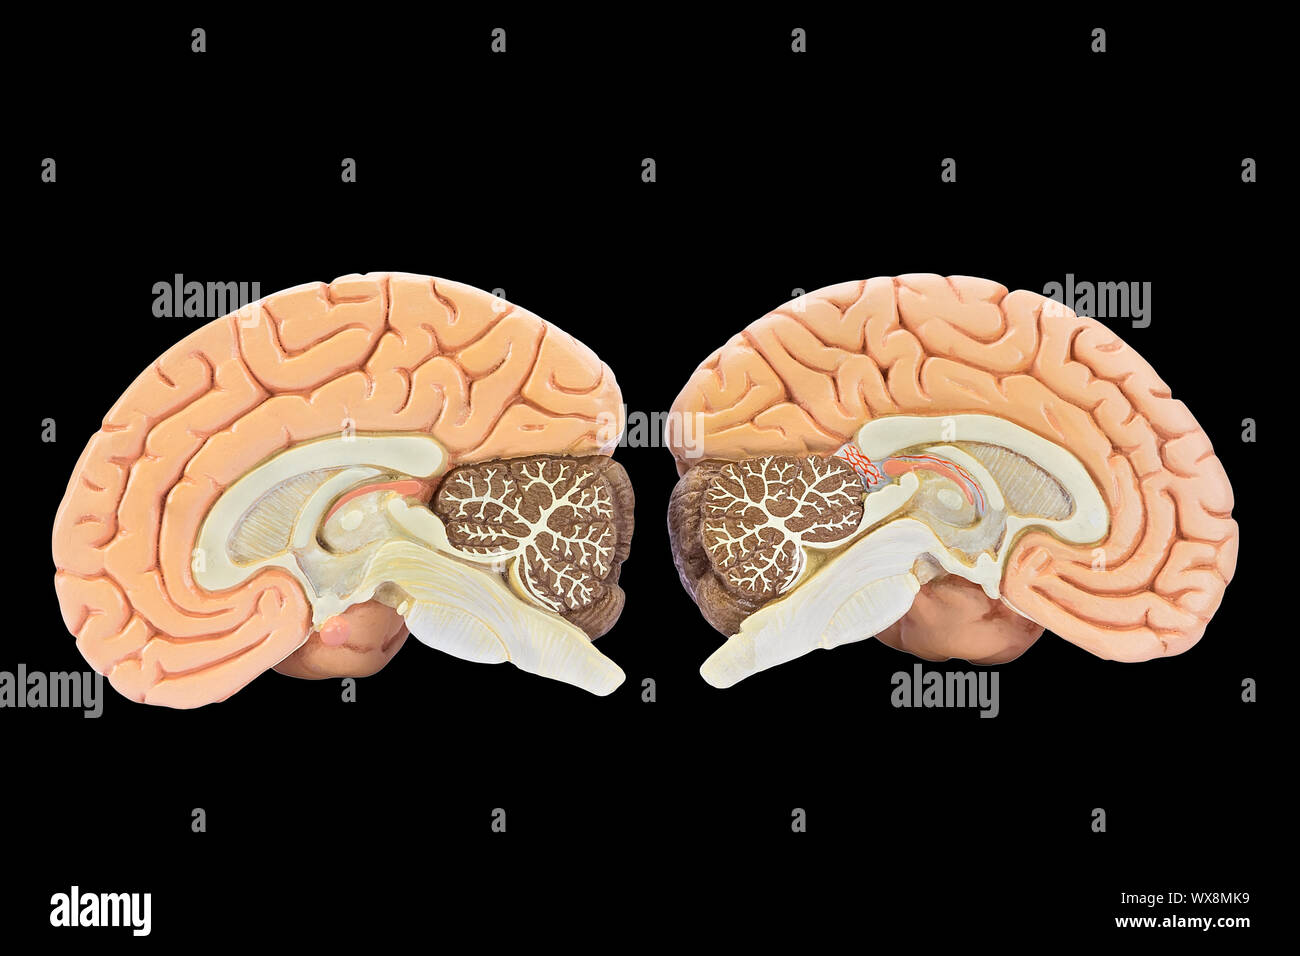 Models of two brain halves on black background Stock Photo